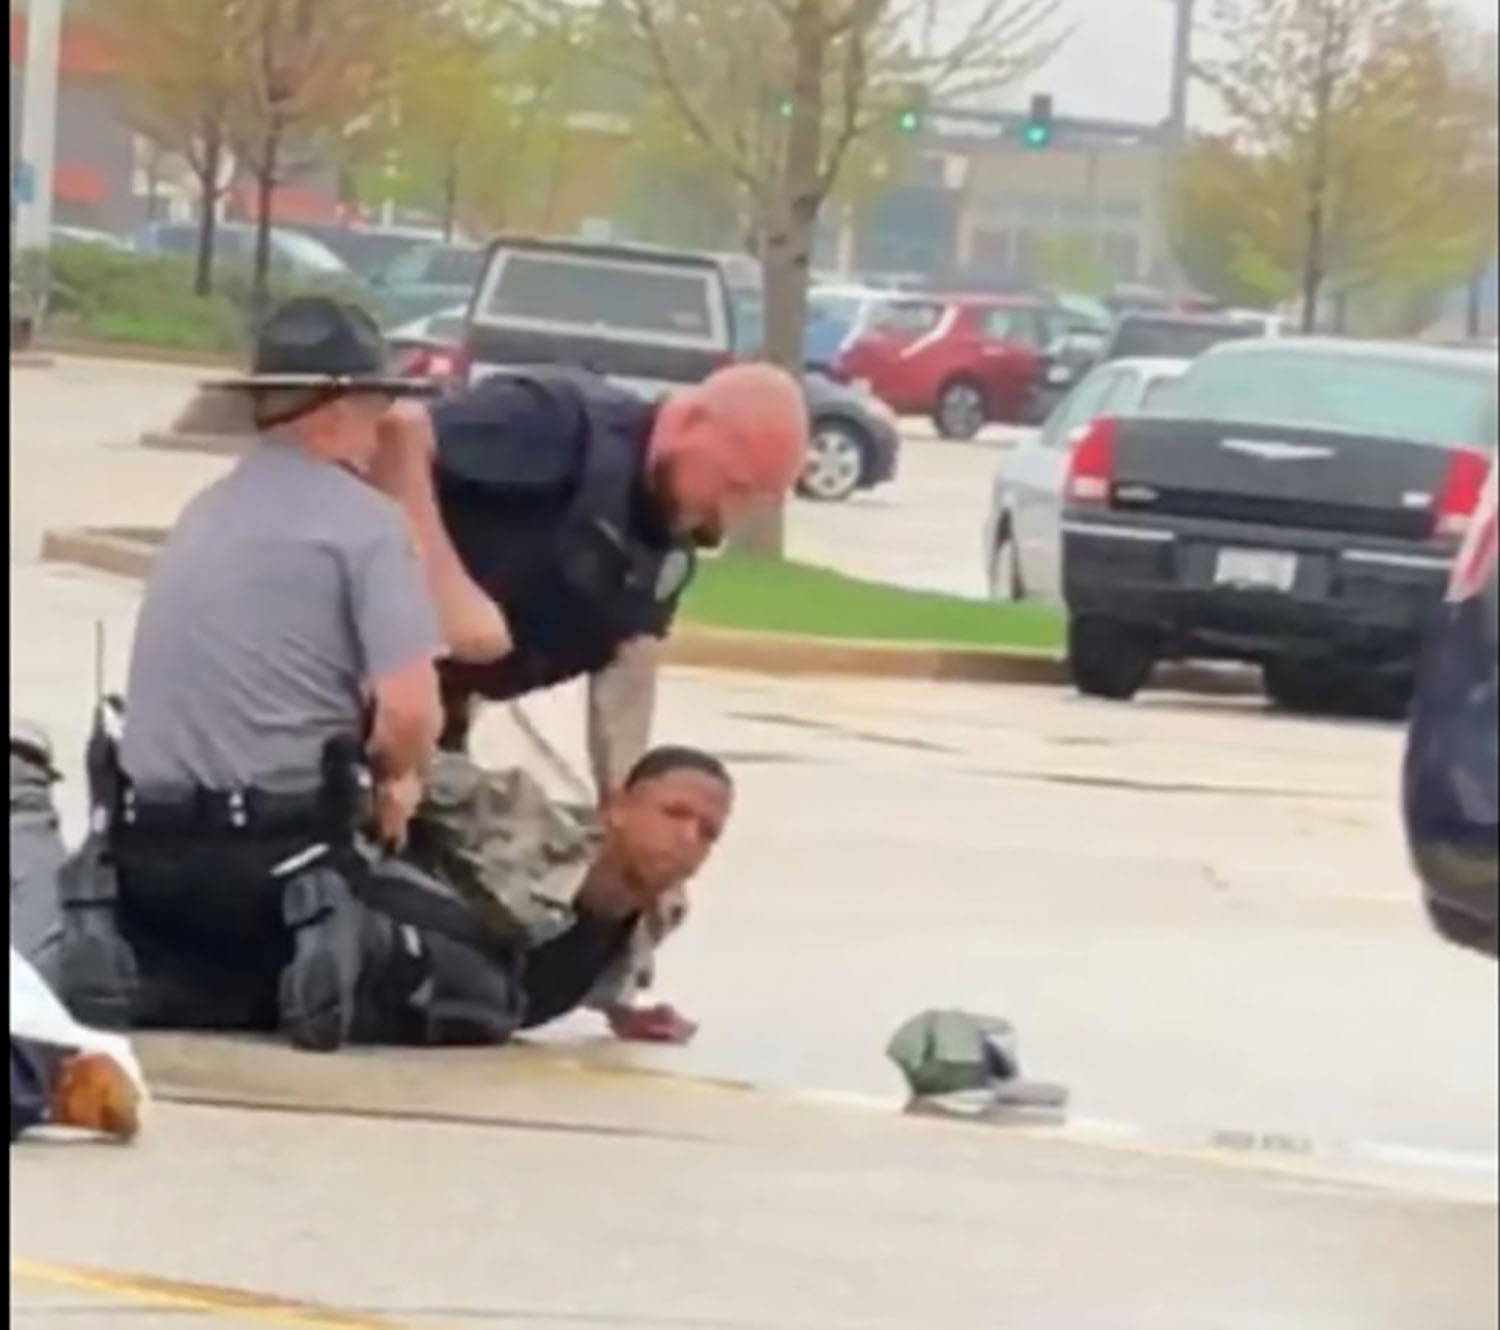 PHOTO: Video footage of an encounter between a Wisconsin police officer and a teen, in which the officer’s allegedly punched the teen multiple times in the head while trying to arrest him at the Mayfair Mall parking lot in Wauwatosa, Wis., May 11, 2018.